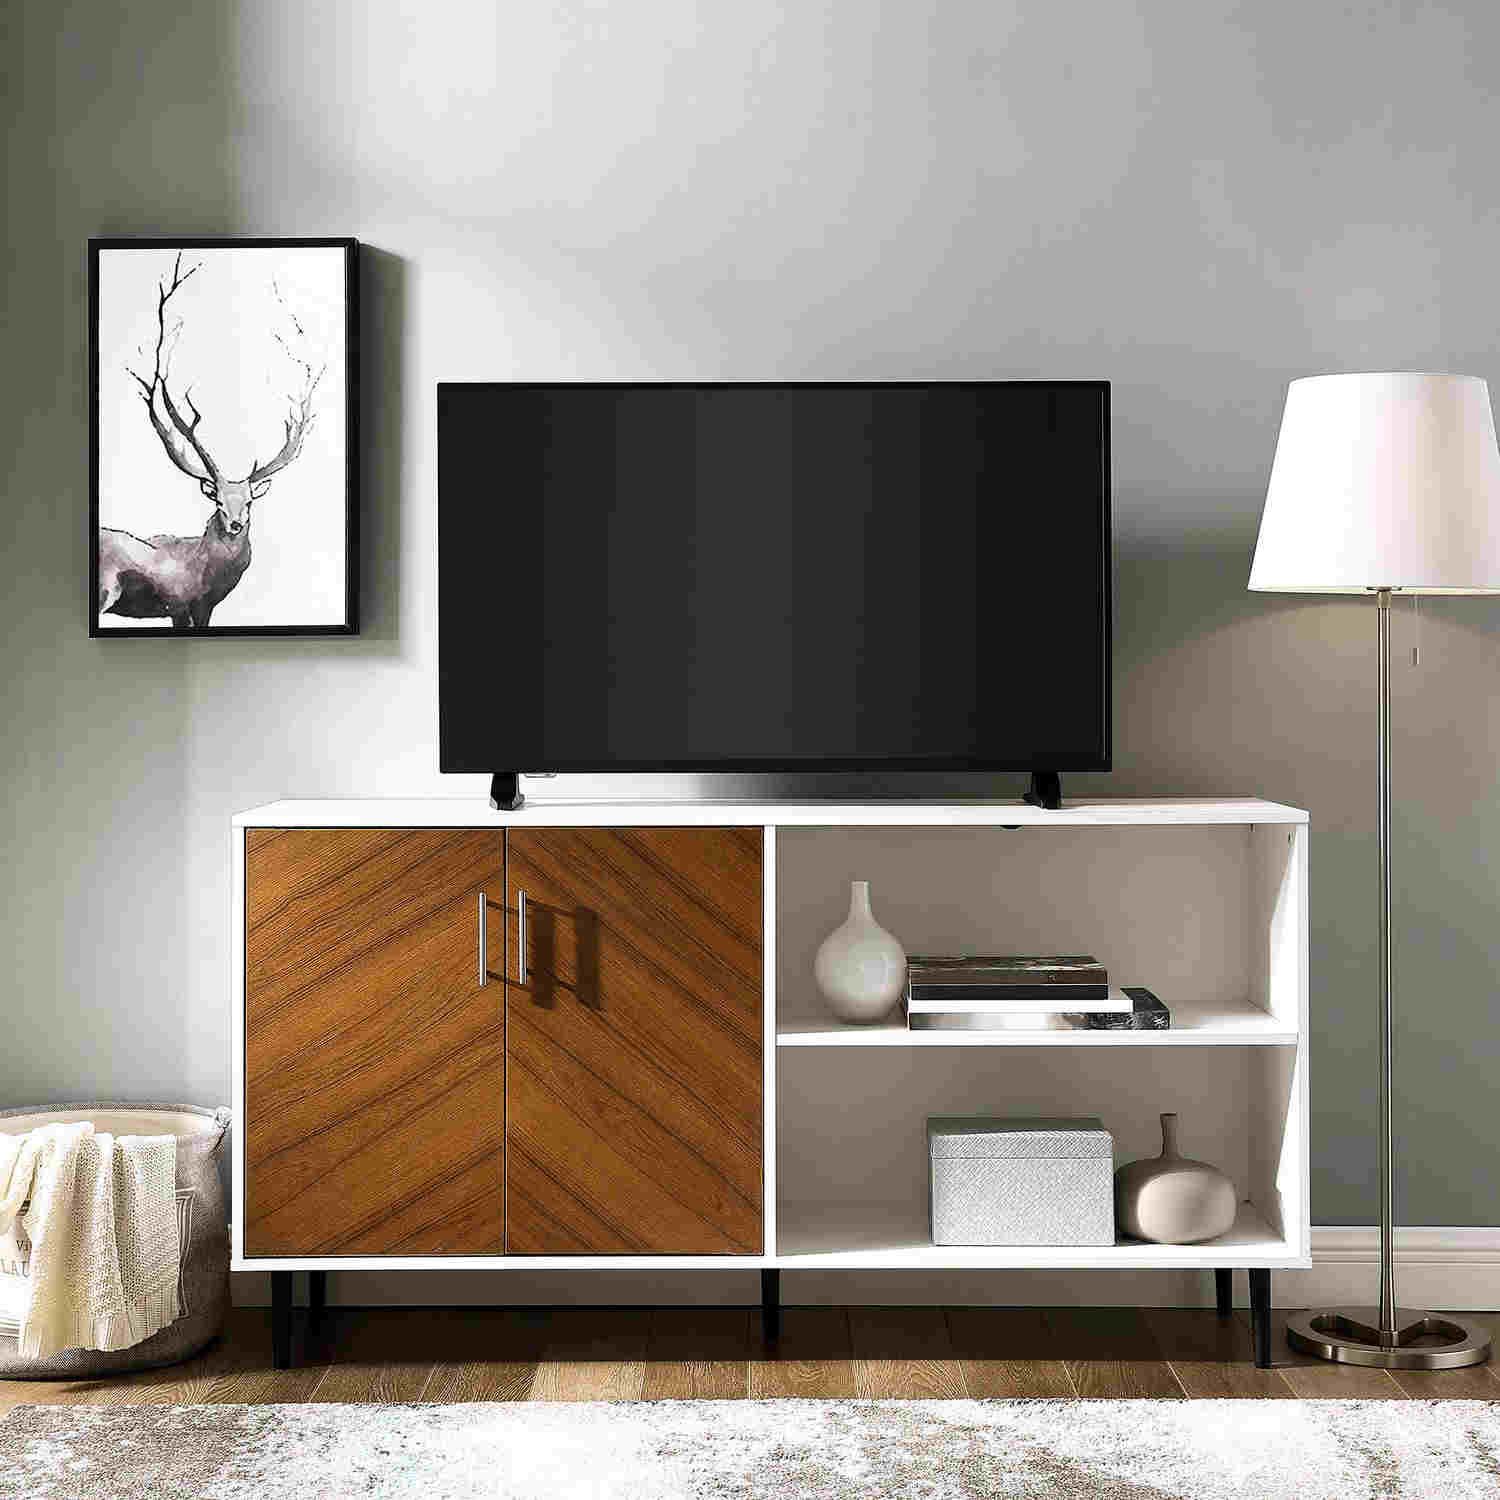 17 Stylish Mid Century Modern Tv Stand Design Ideas Intended For Contemporary Tv Stands (View 8 of 15)